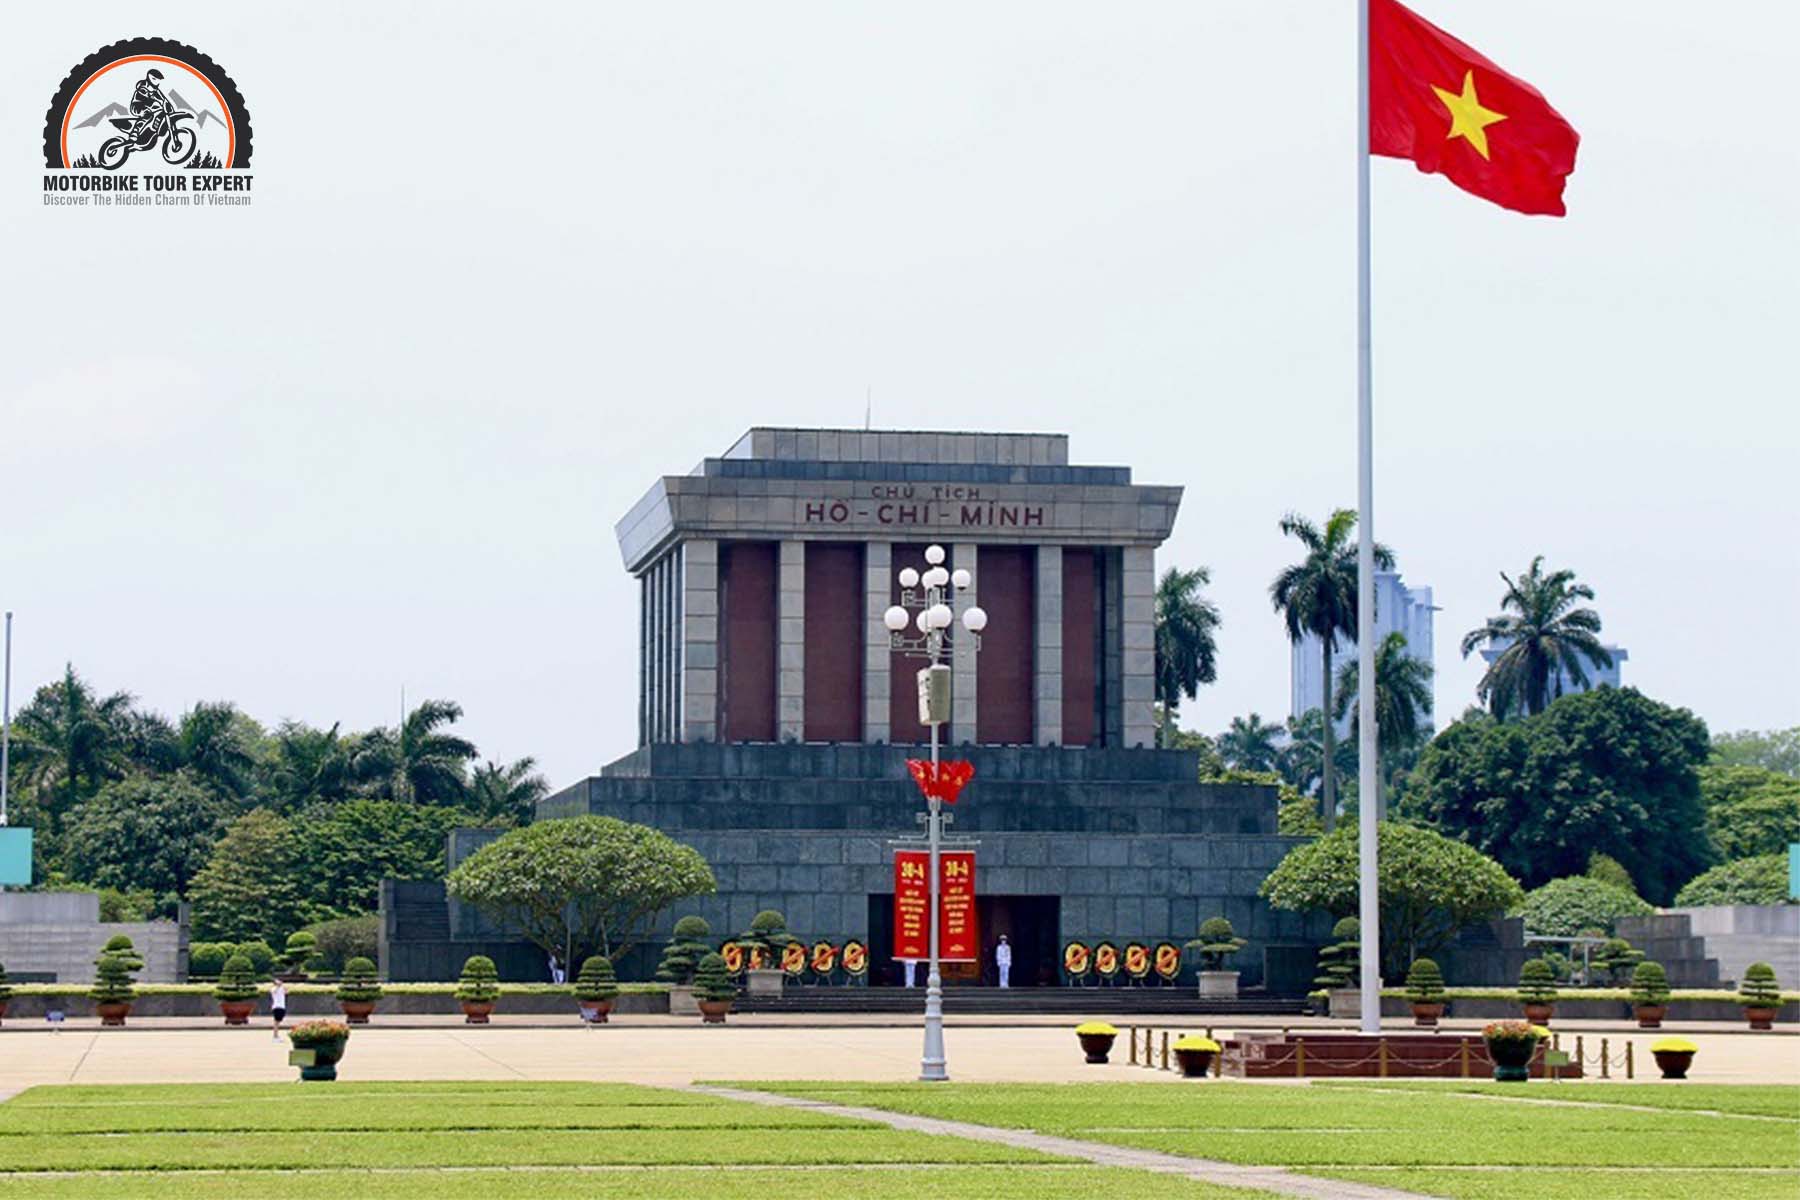 The location of President Ho Chi Minh's Mausoleum exudes a solemn and dignified atmosphere